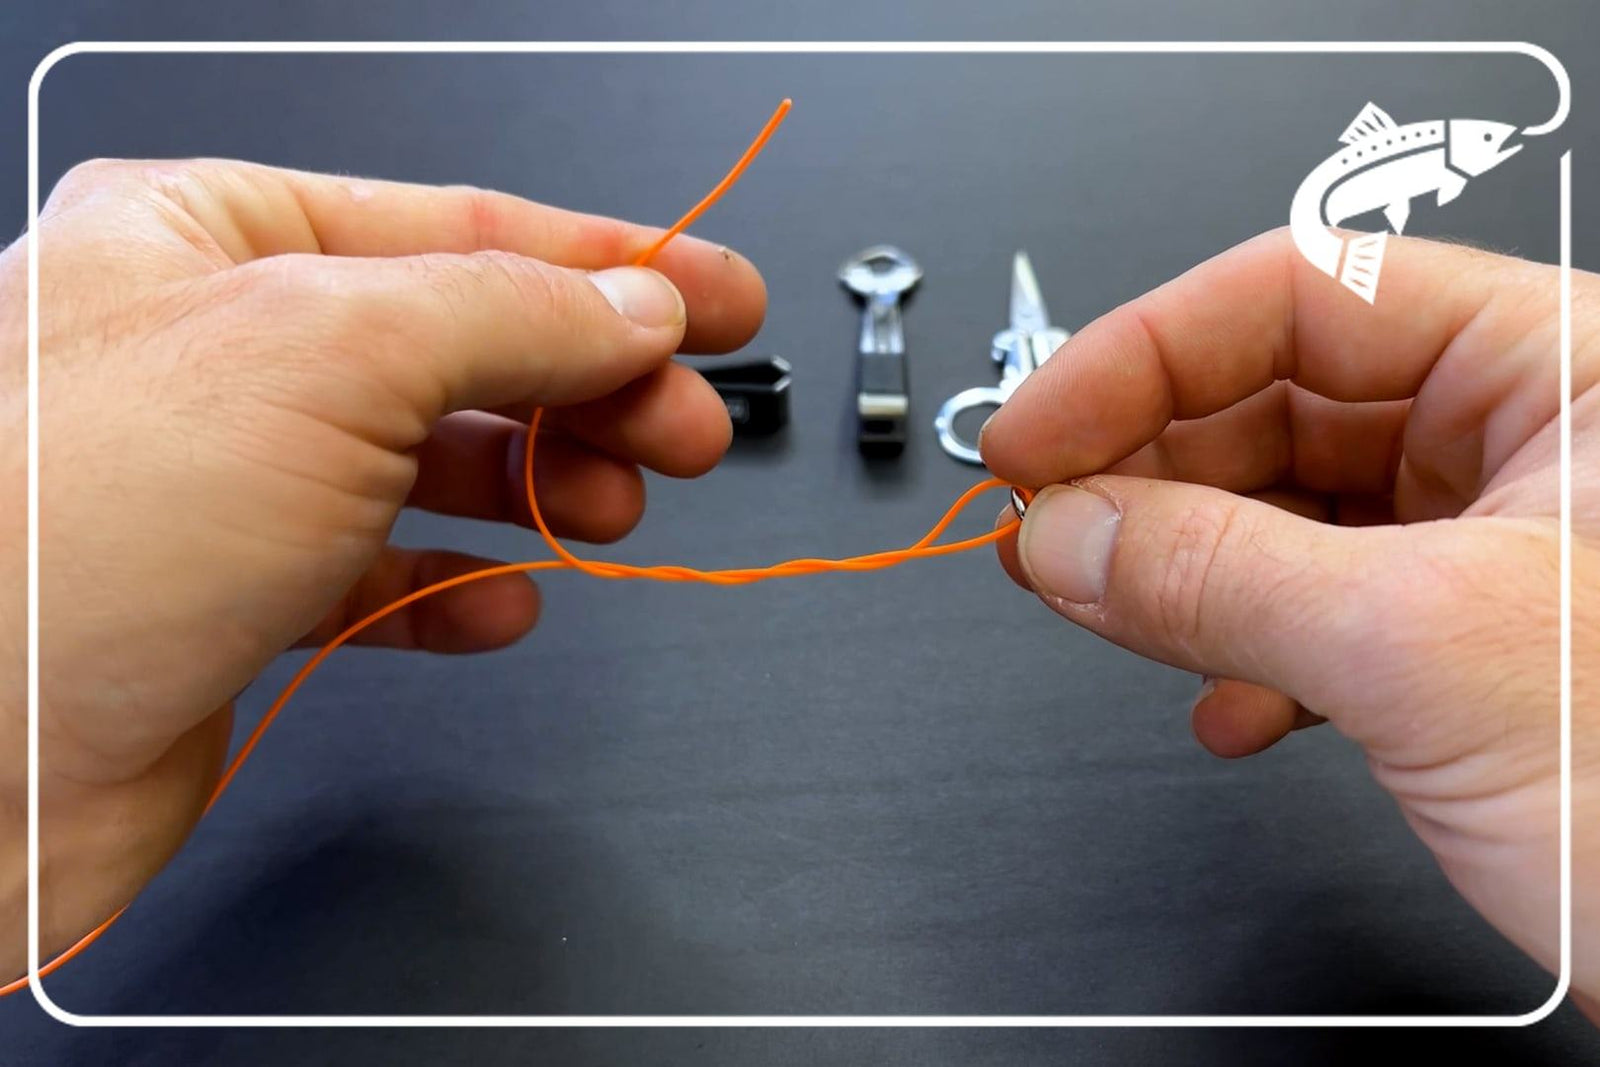 JHFLYCO 101: How to Tie 4 Essential Fly Fishing Knots | Jackson Hole Fly Company